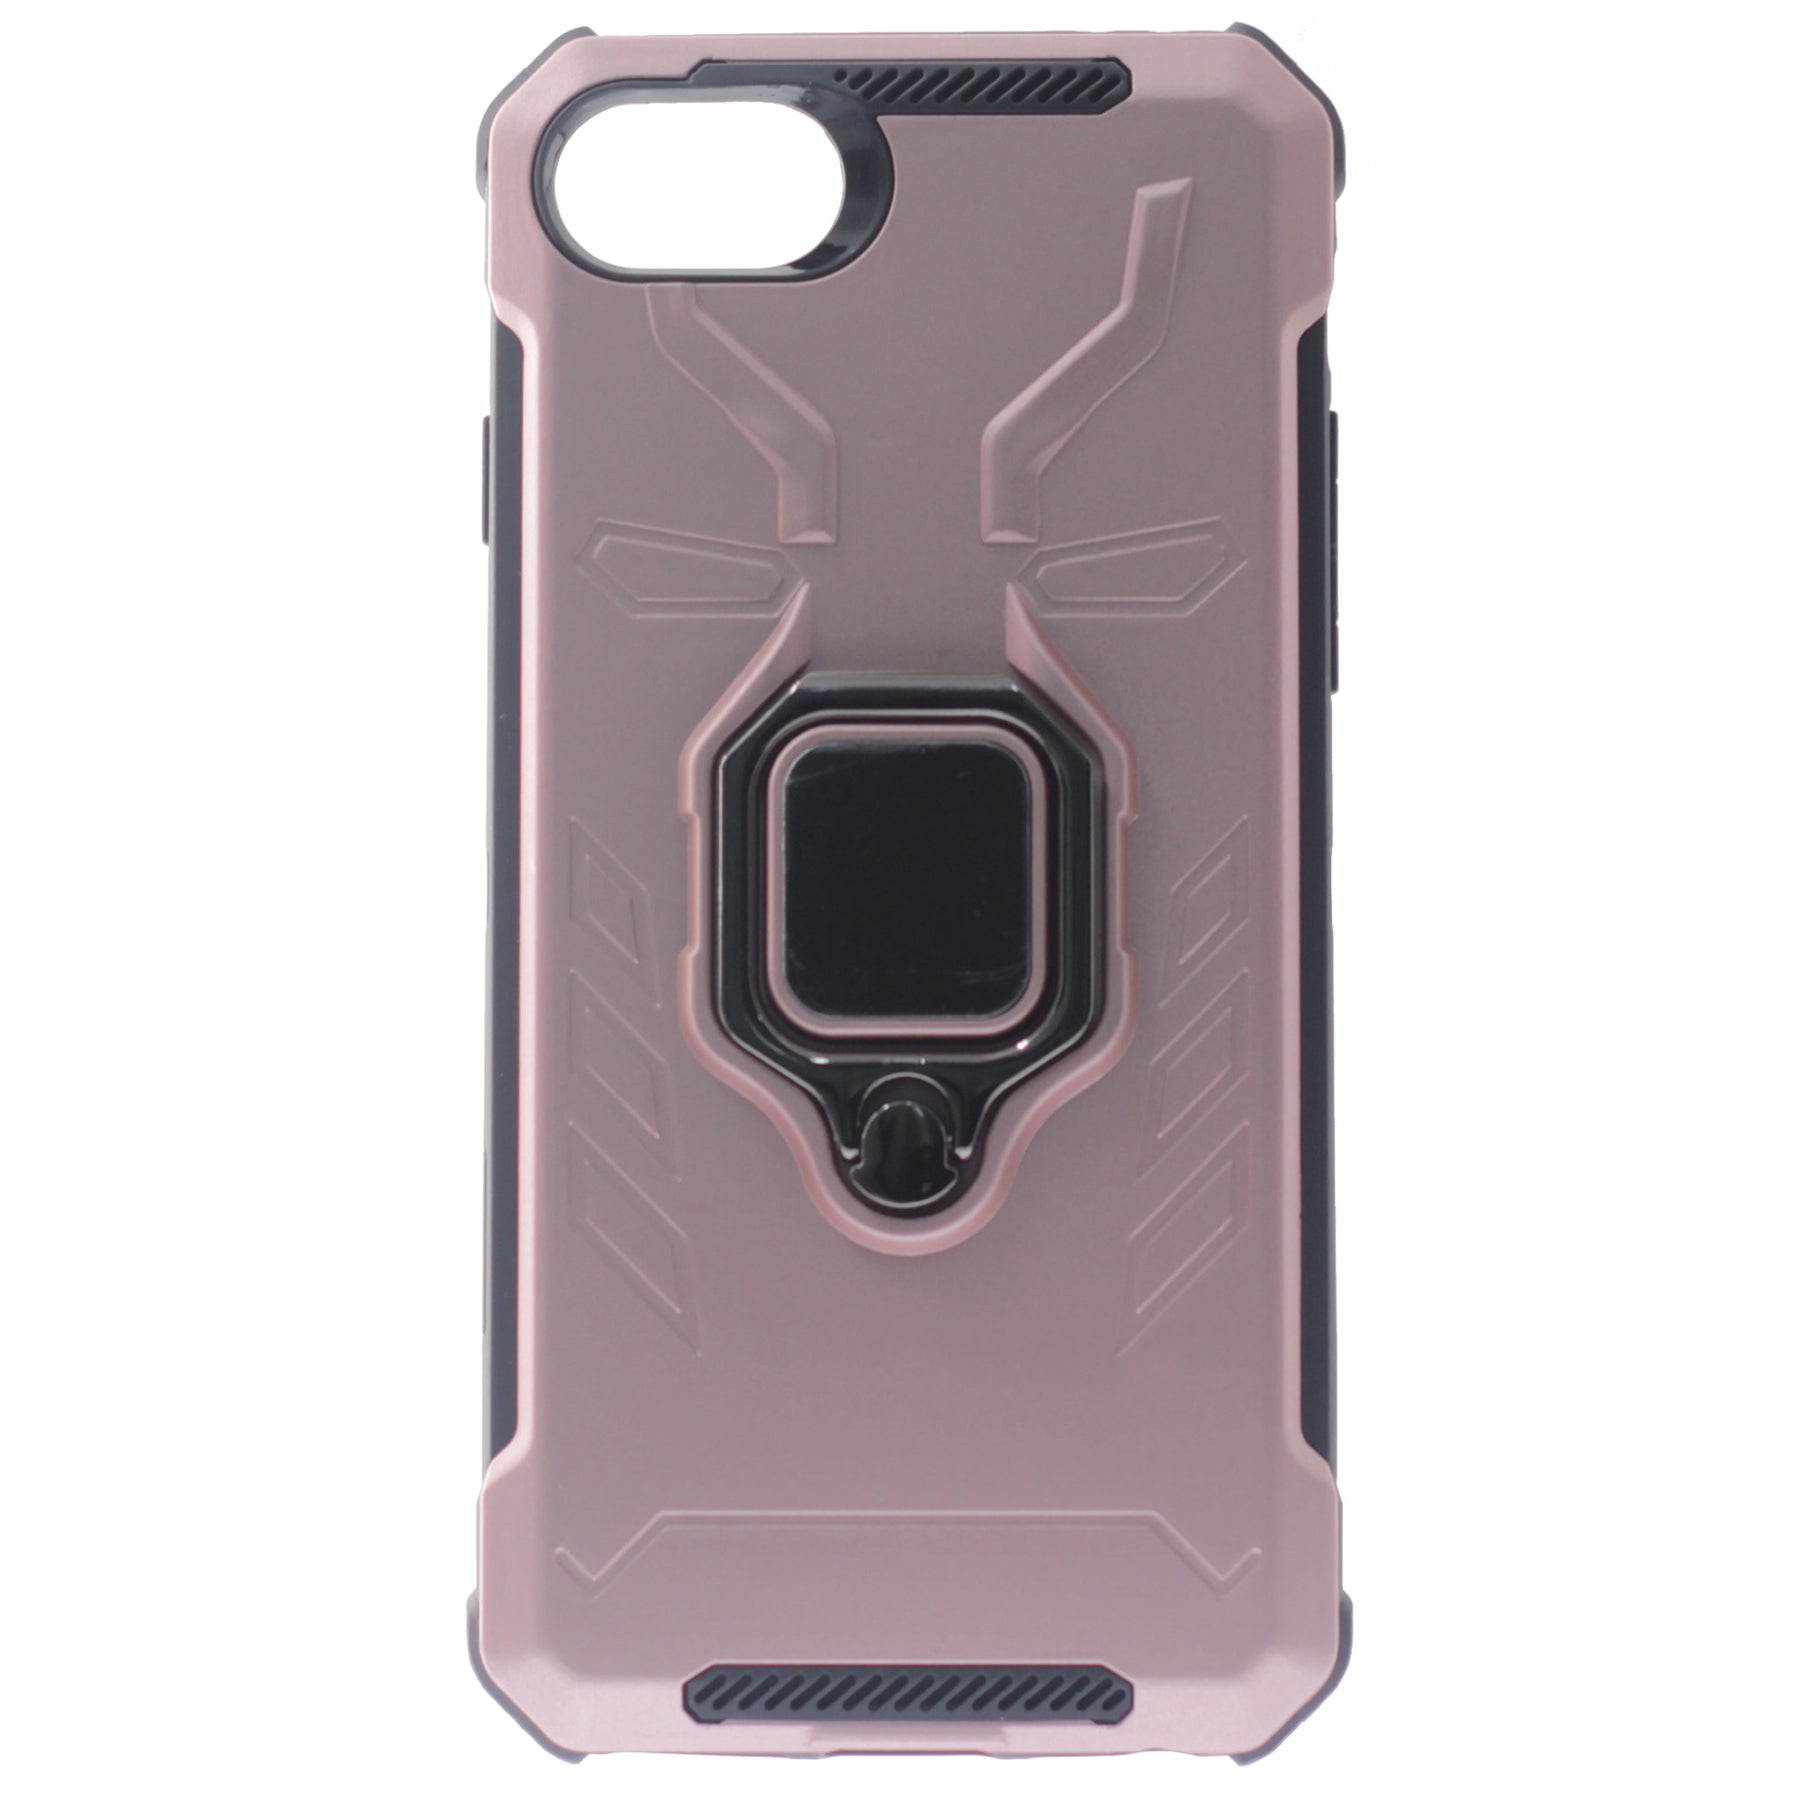 iPhone 6/7/8/SE 2020 Case, Ring Armor Phone Case, Color Rose Gold